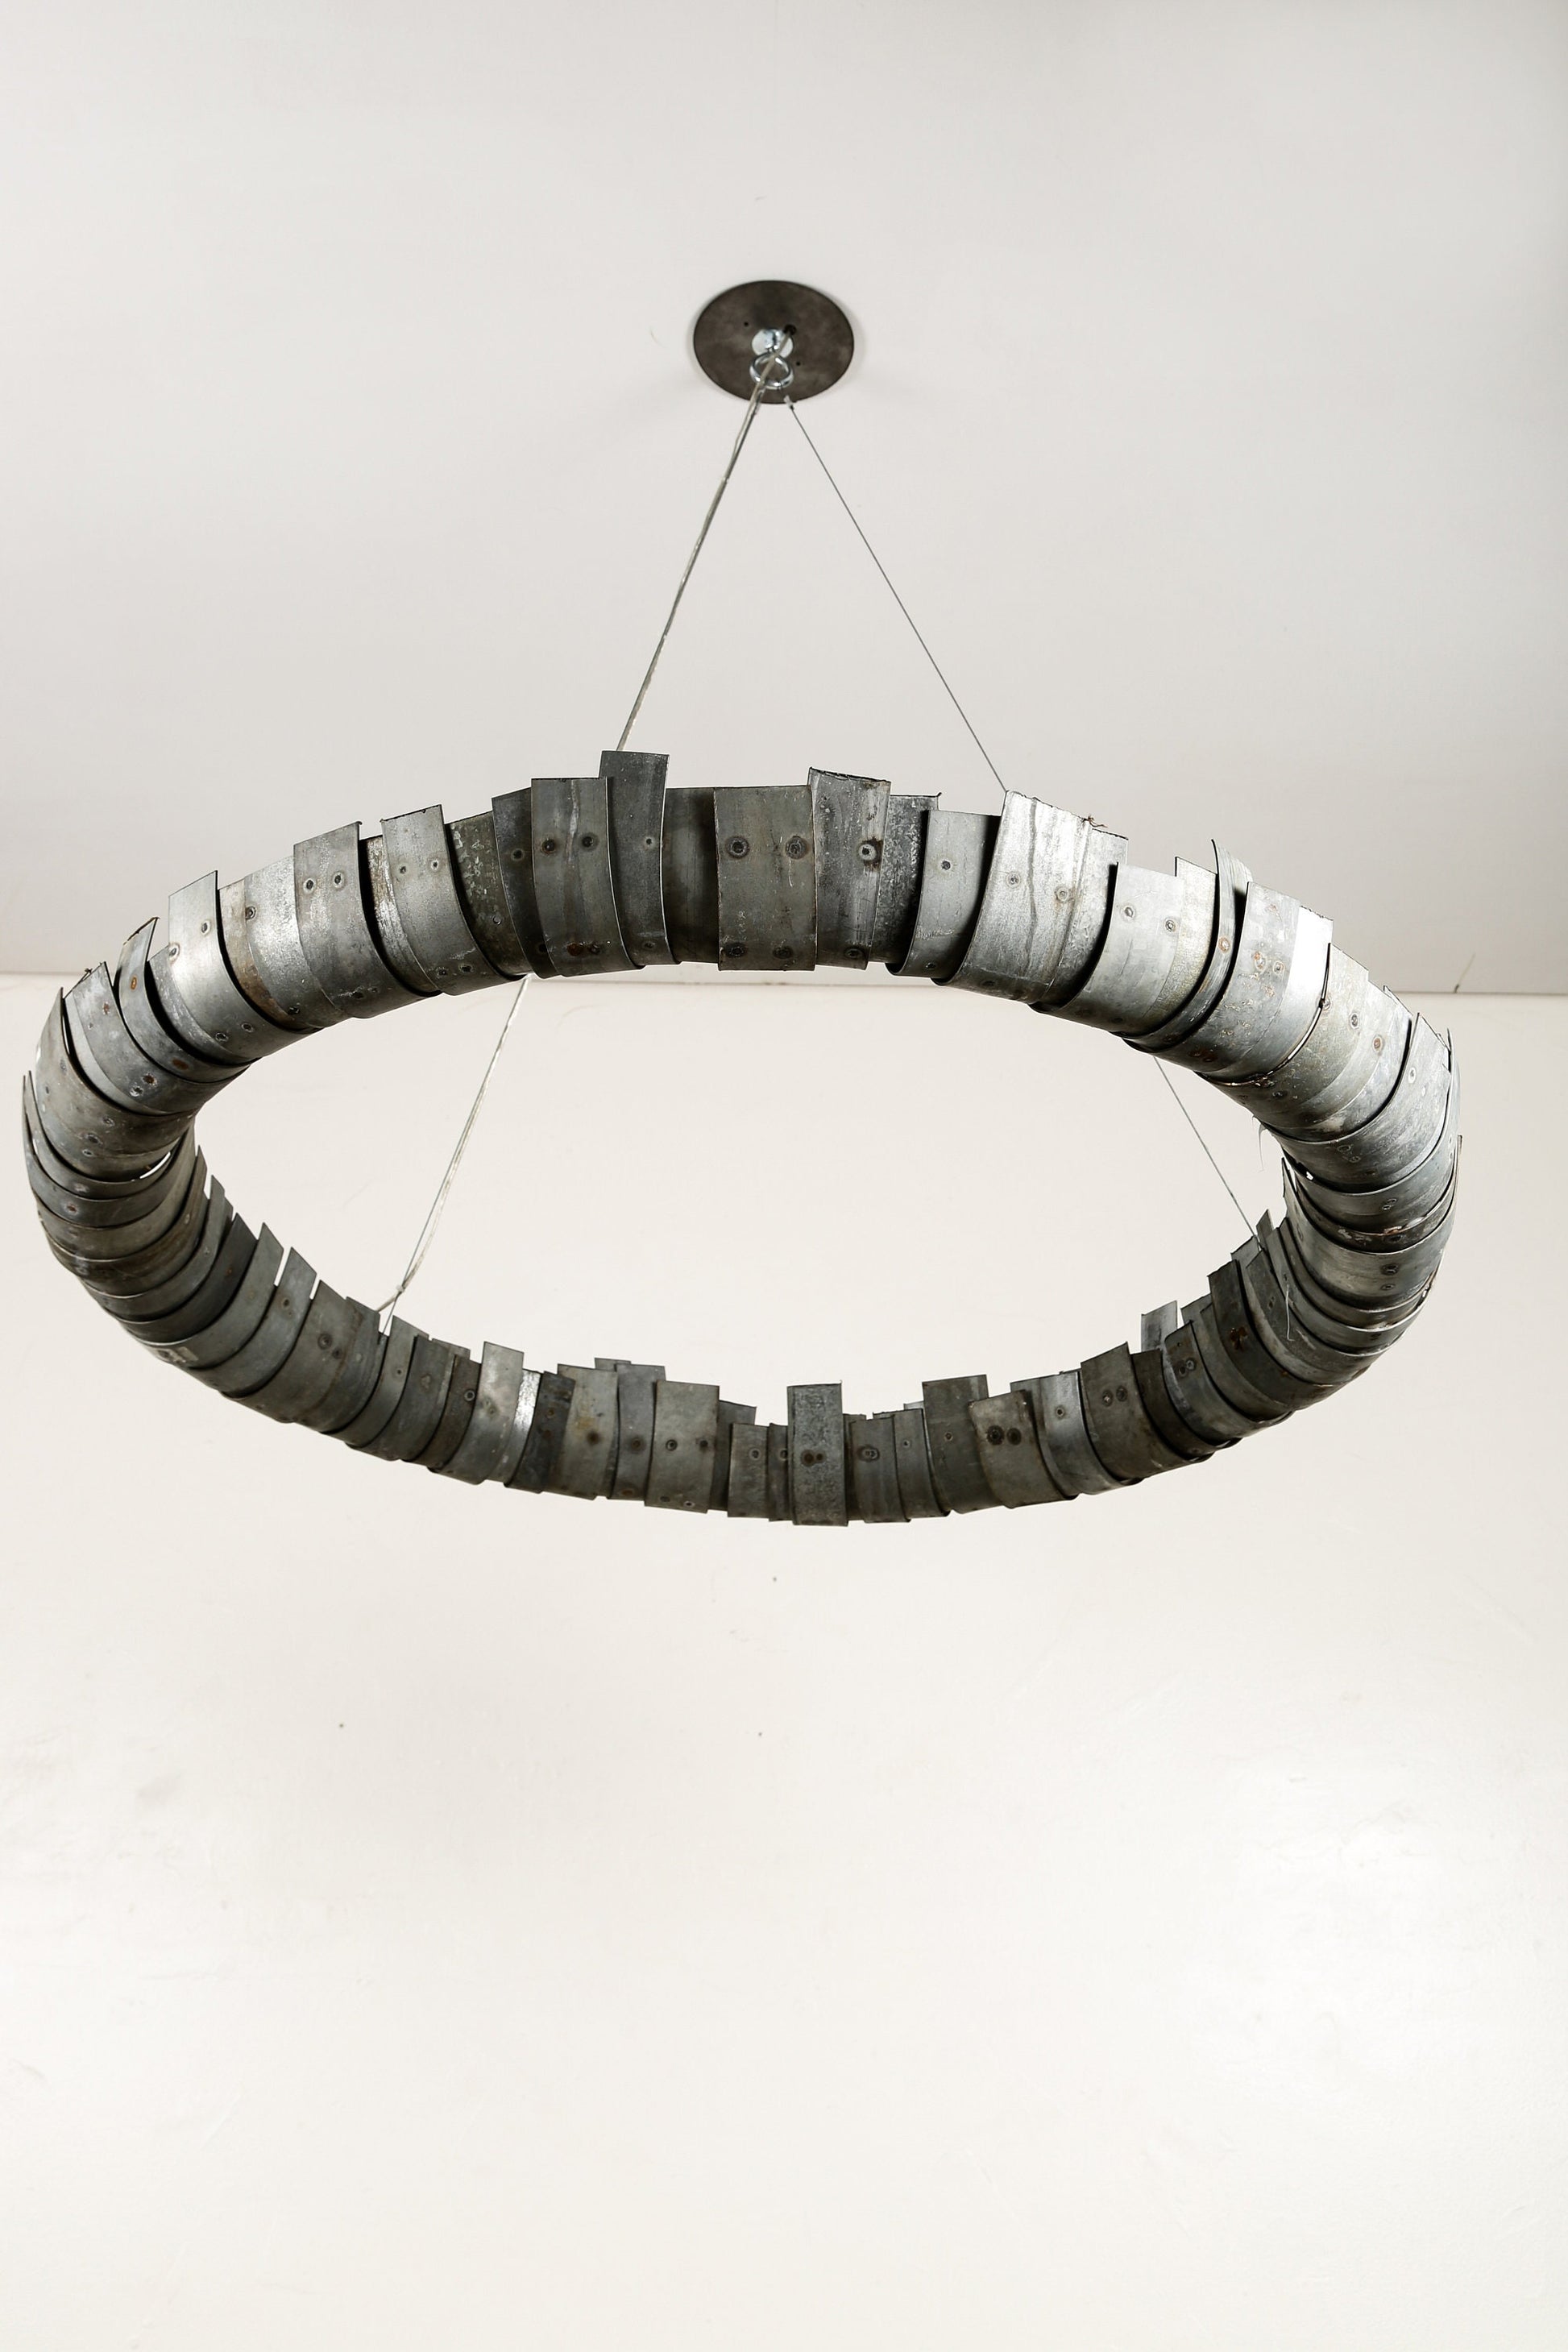 Wine Barrel Ring LED Chandelier - Circulum - made from retired wine barrel rings. 100% Recycled!